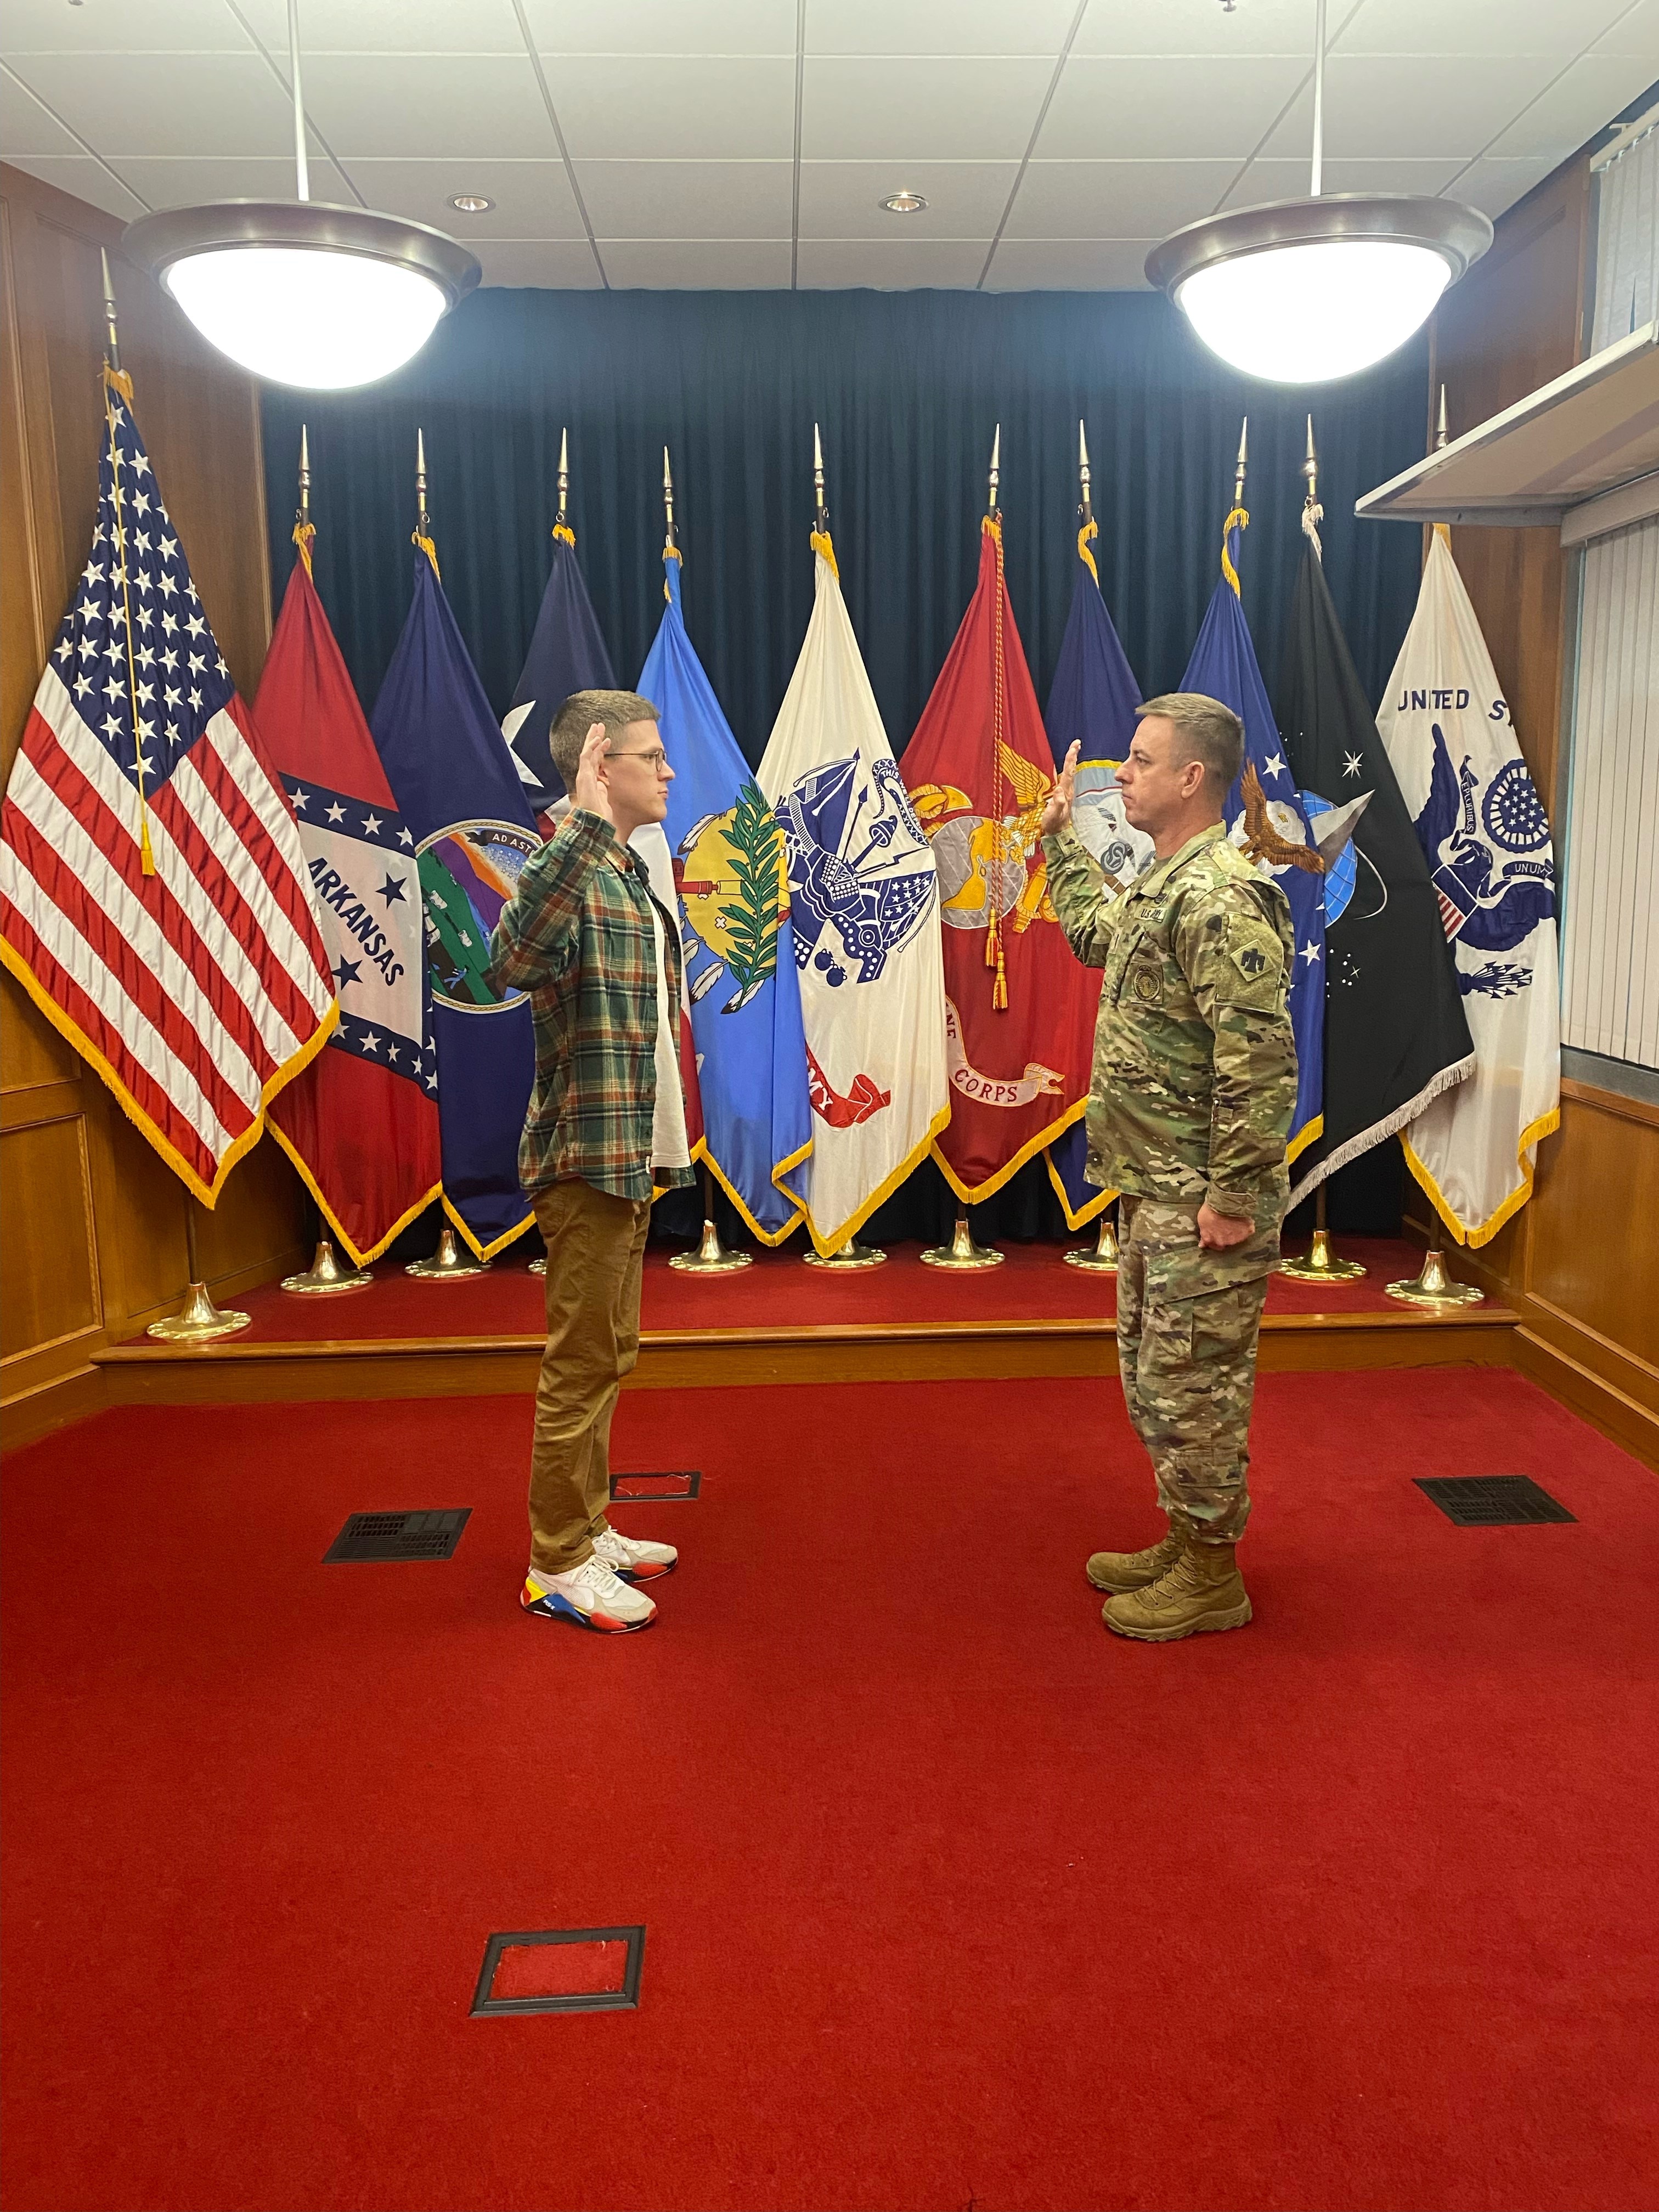 Piper raises his right hand and recites the oath to swear in to the Army.